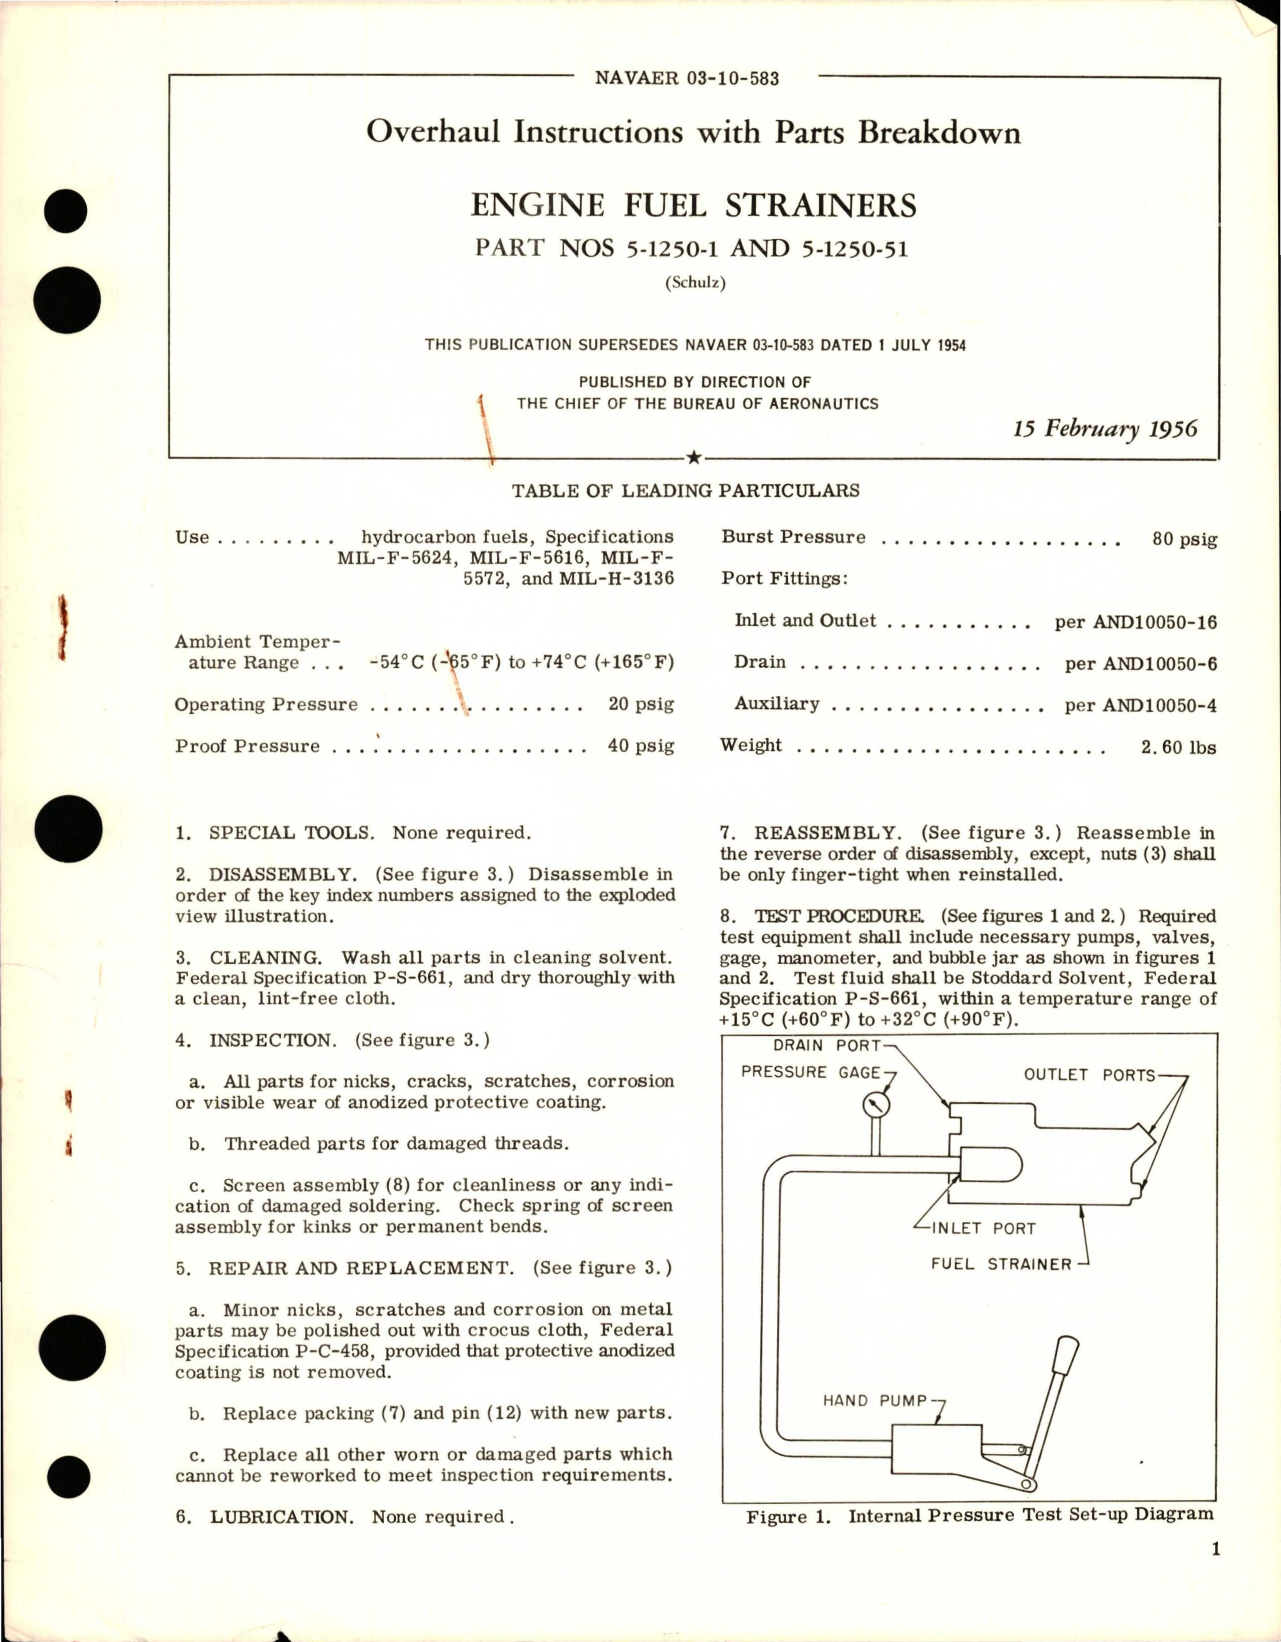 Sample page 1 from AirCorps Library document: Overhaul Instructions with Parts Breakdown for Engine Fuel Strainers - Parts 5-1250-1 and 5-1250-51